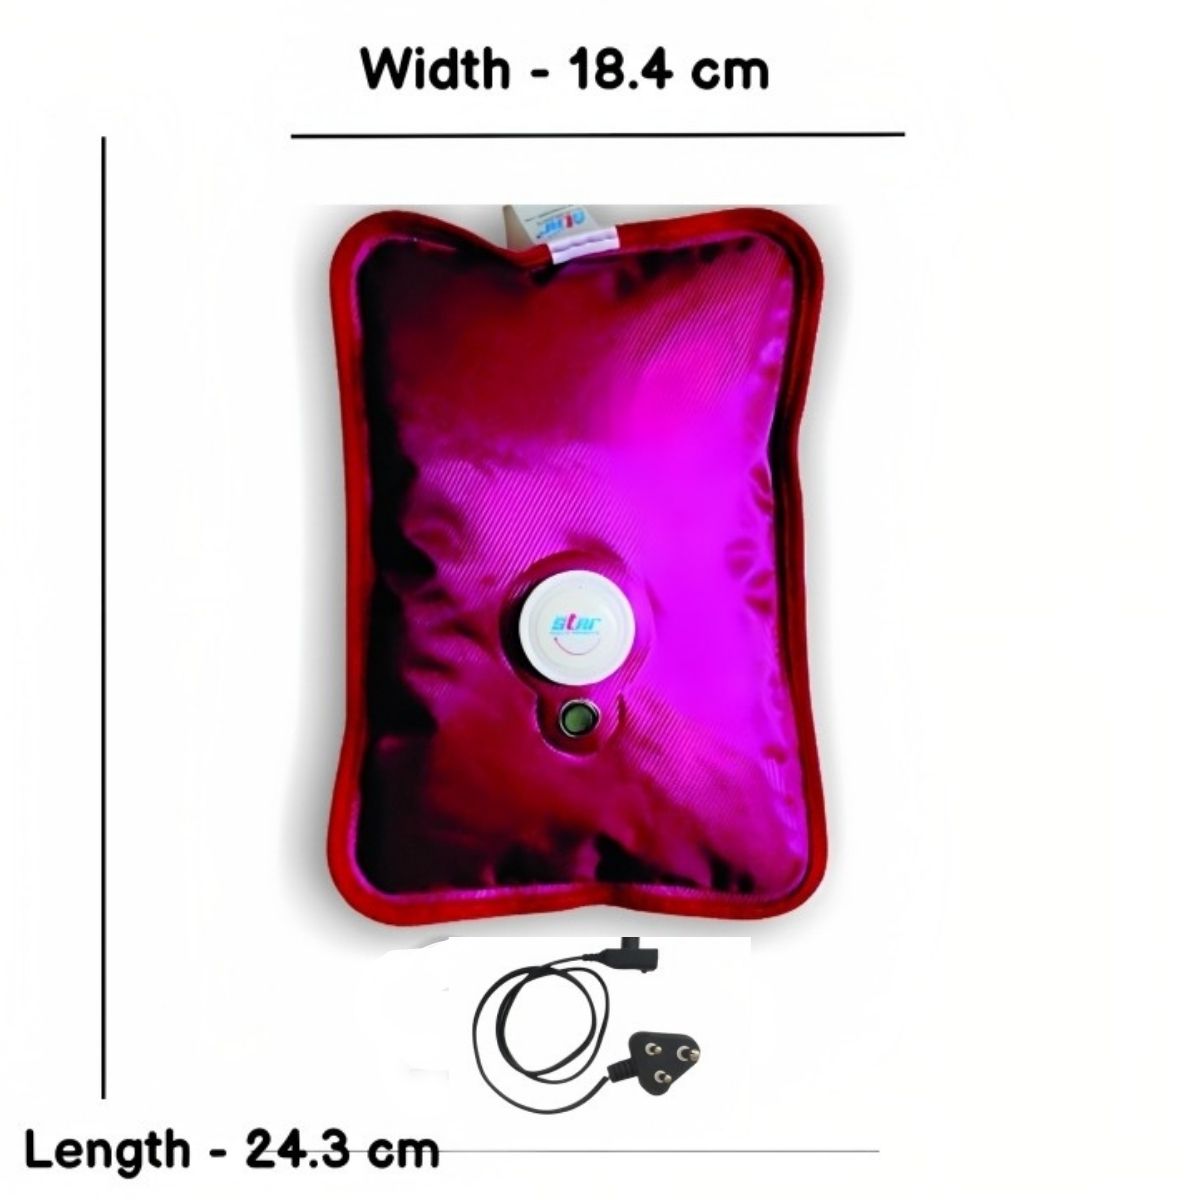 Ortho Rechargeable Delux Heating Pad